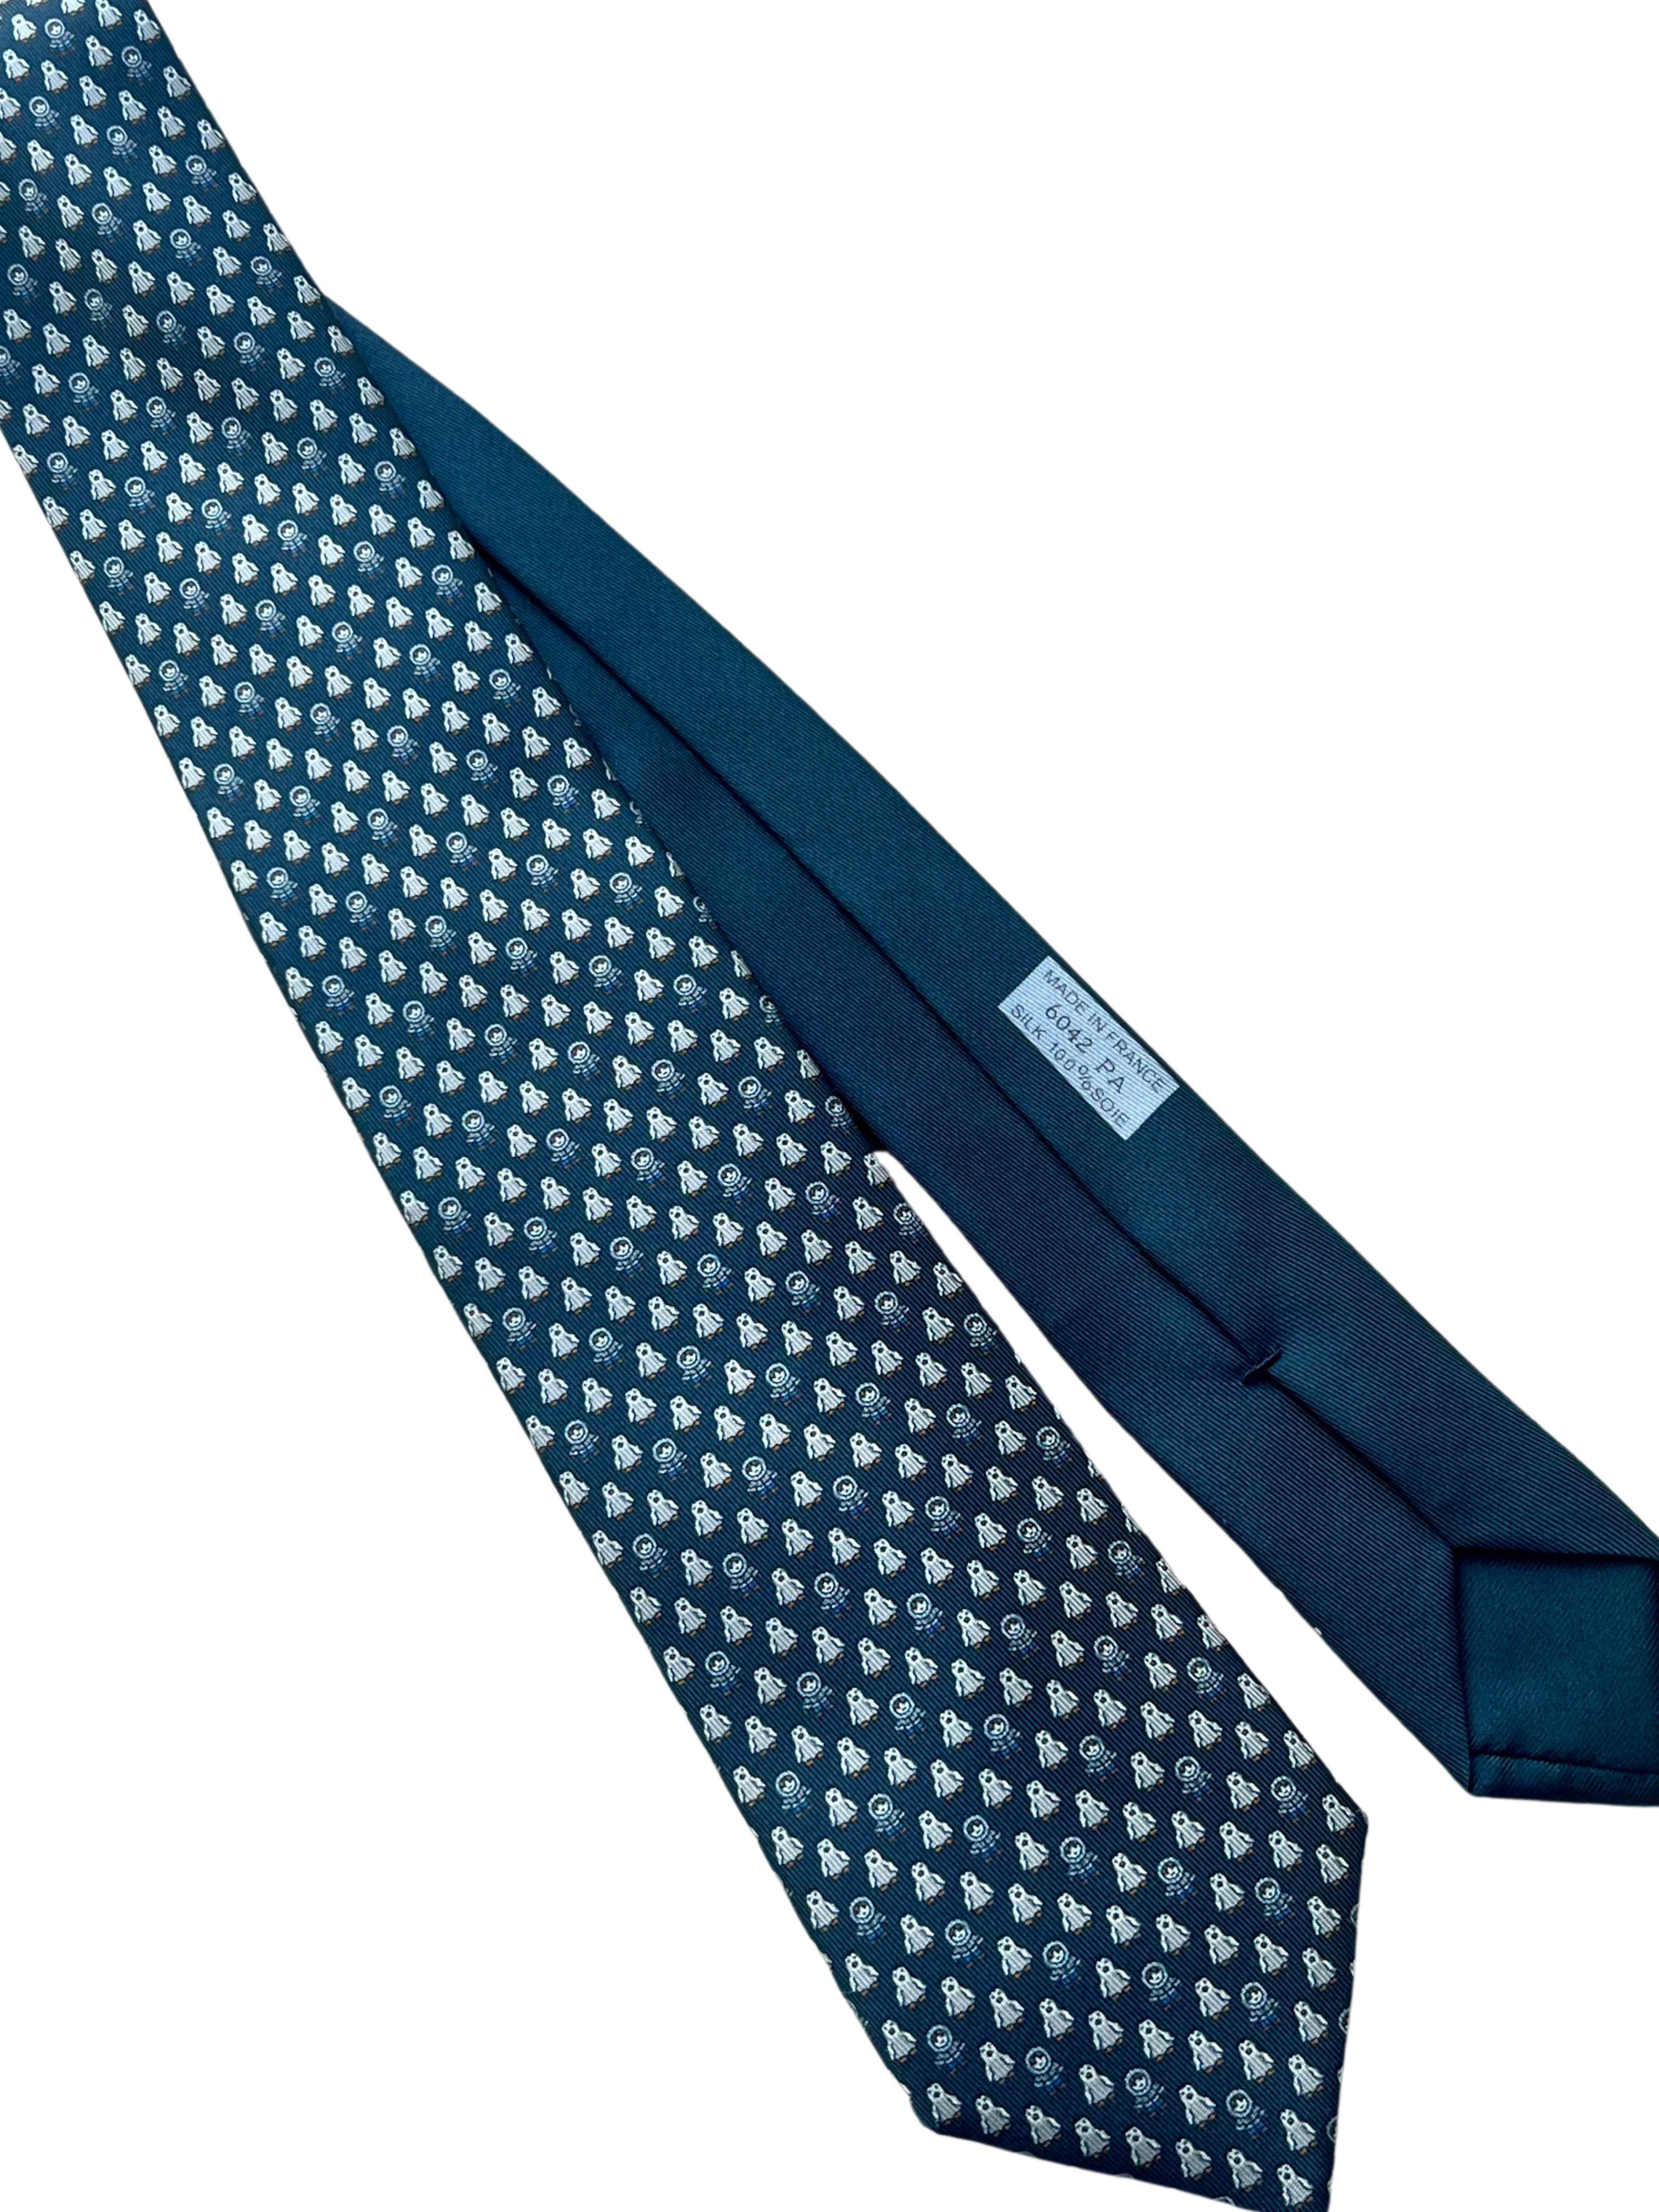 Women's or Men's HERMÈS PINGLOO TIE Marine, Blue & White For Sale